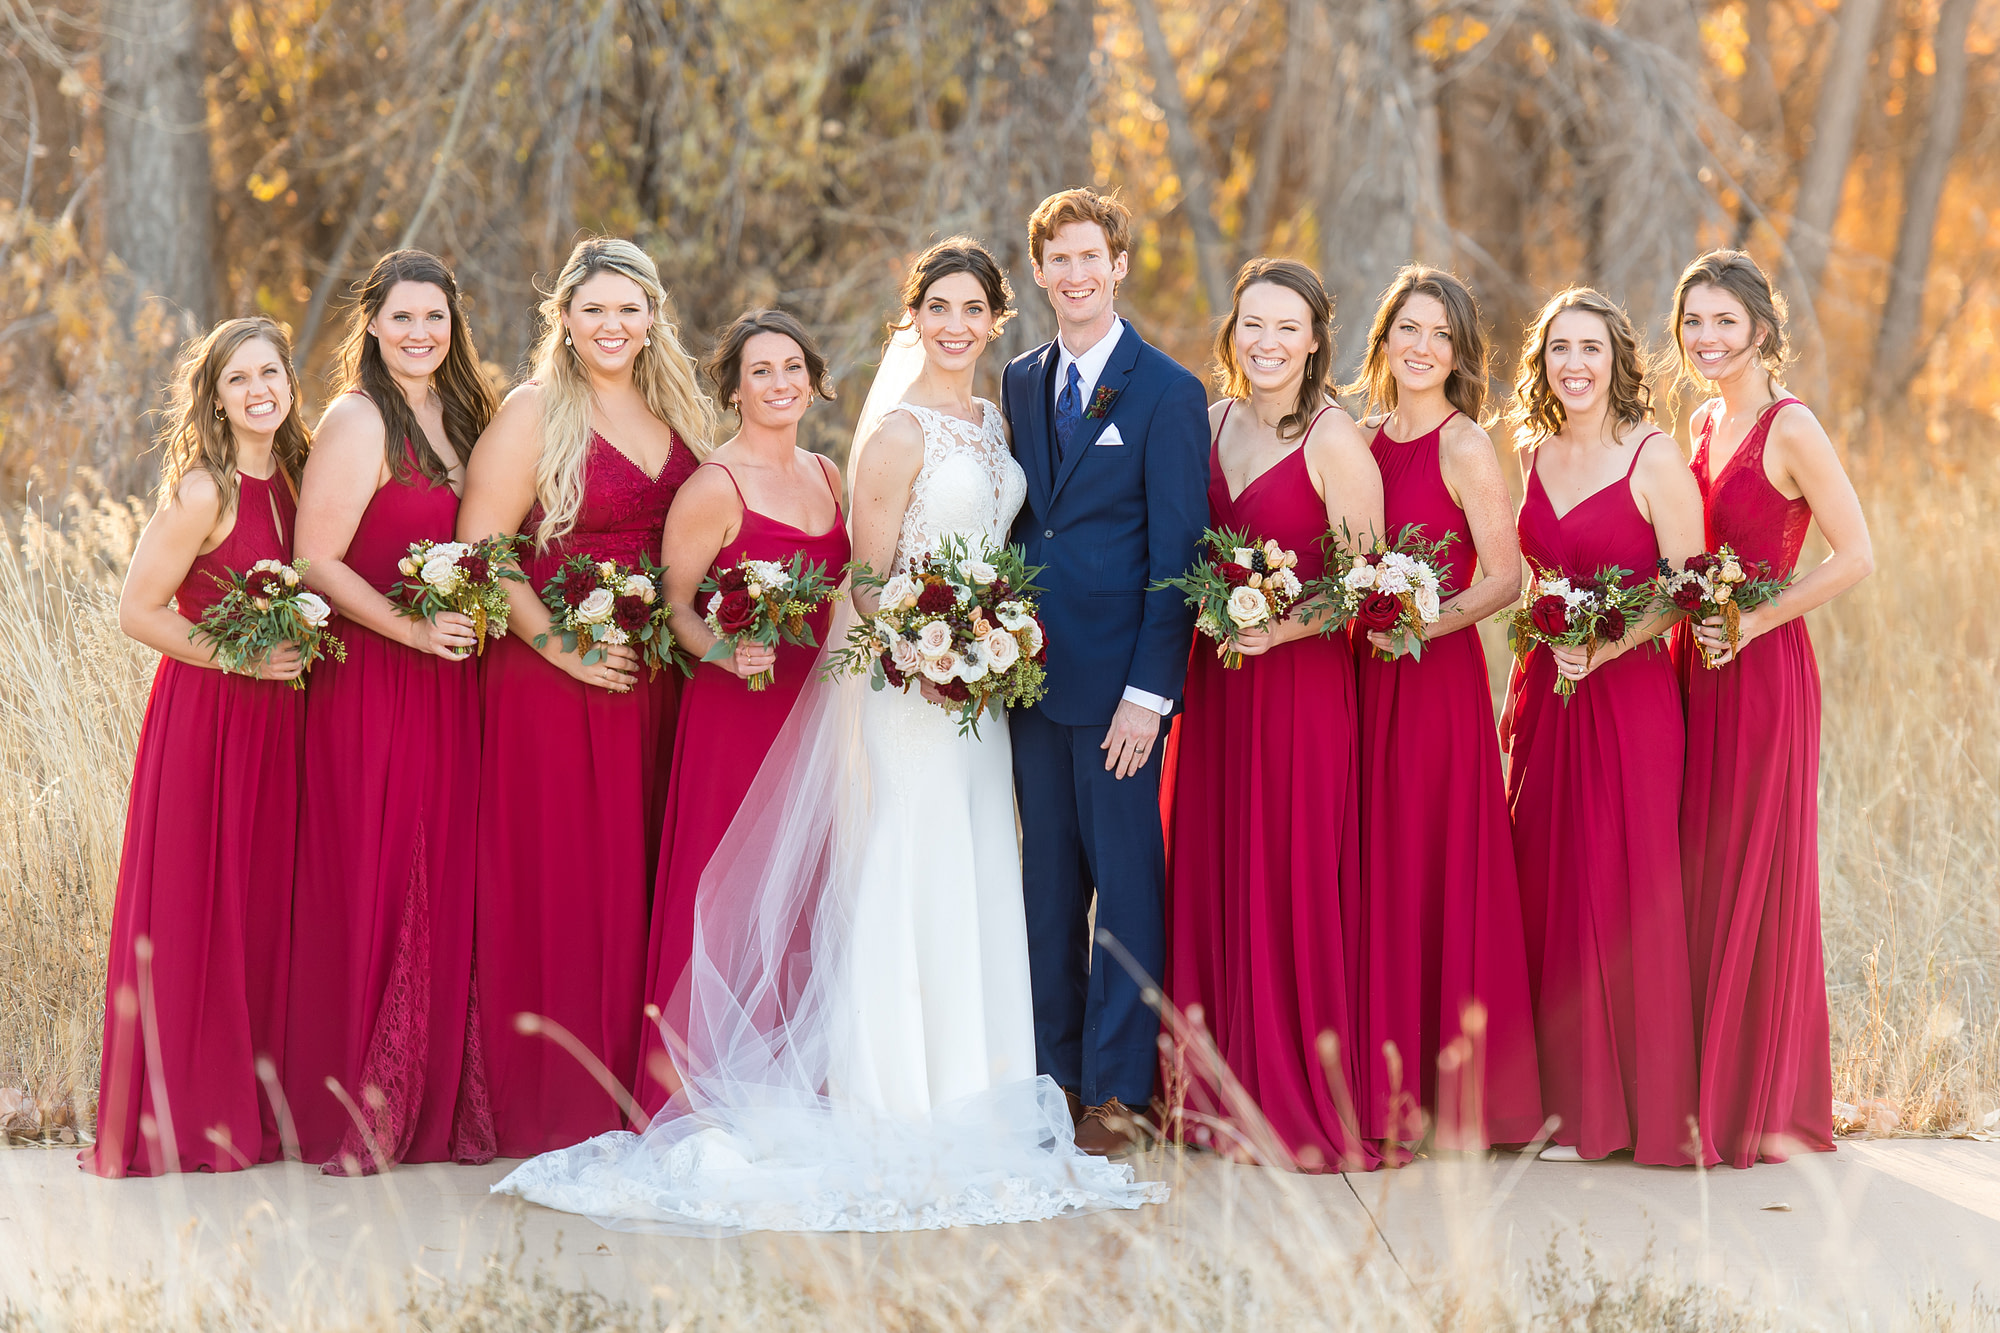 Bride and groom pose with bridesmaids at Cherry Creek State Park in Aurora, Colorado.